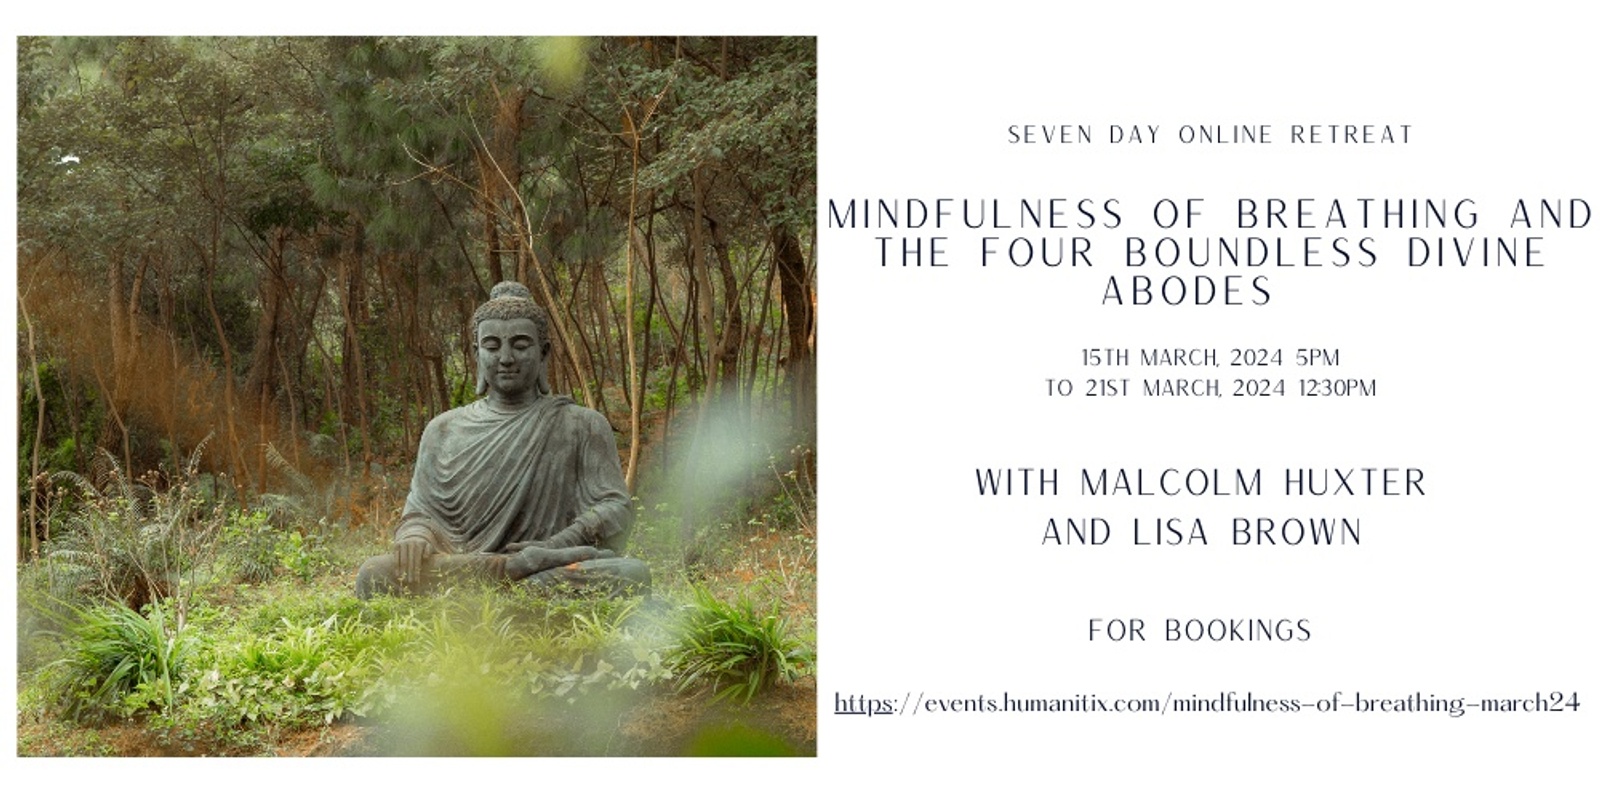 Mindfulness of Breathing and the Four Boundless Divine Abodes